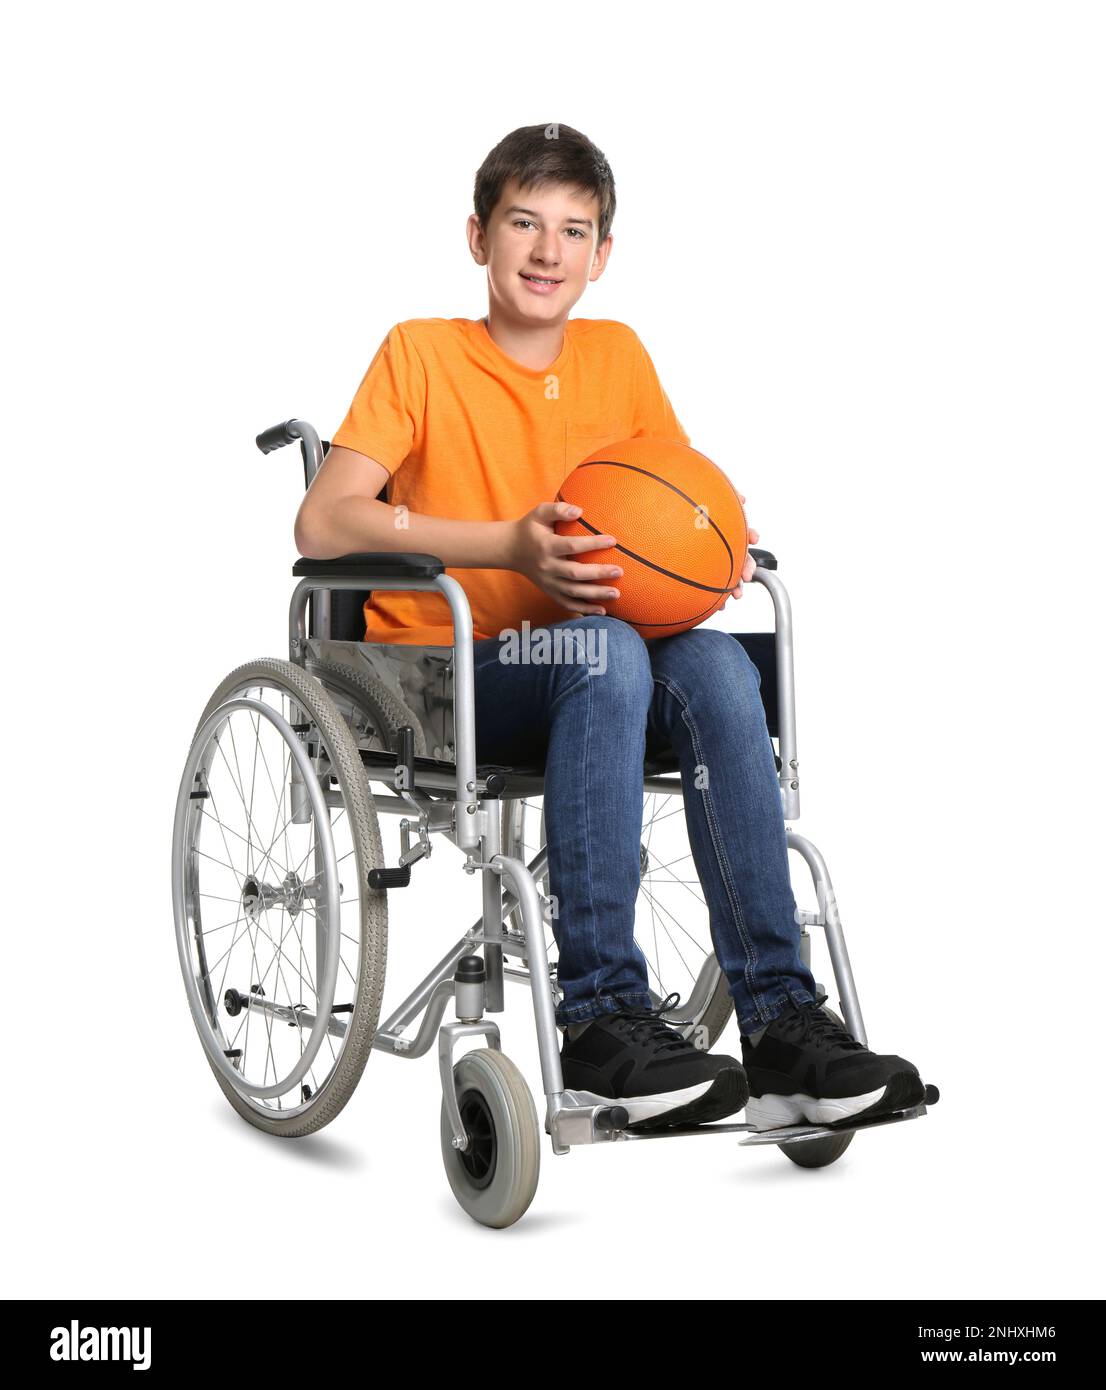 Disabled teenage boy in wheelchair with basketball ball on white background Stock Photo